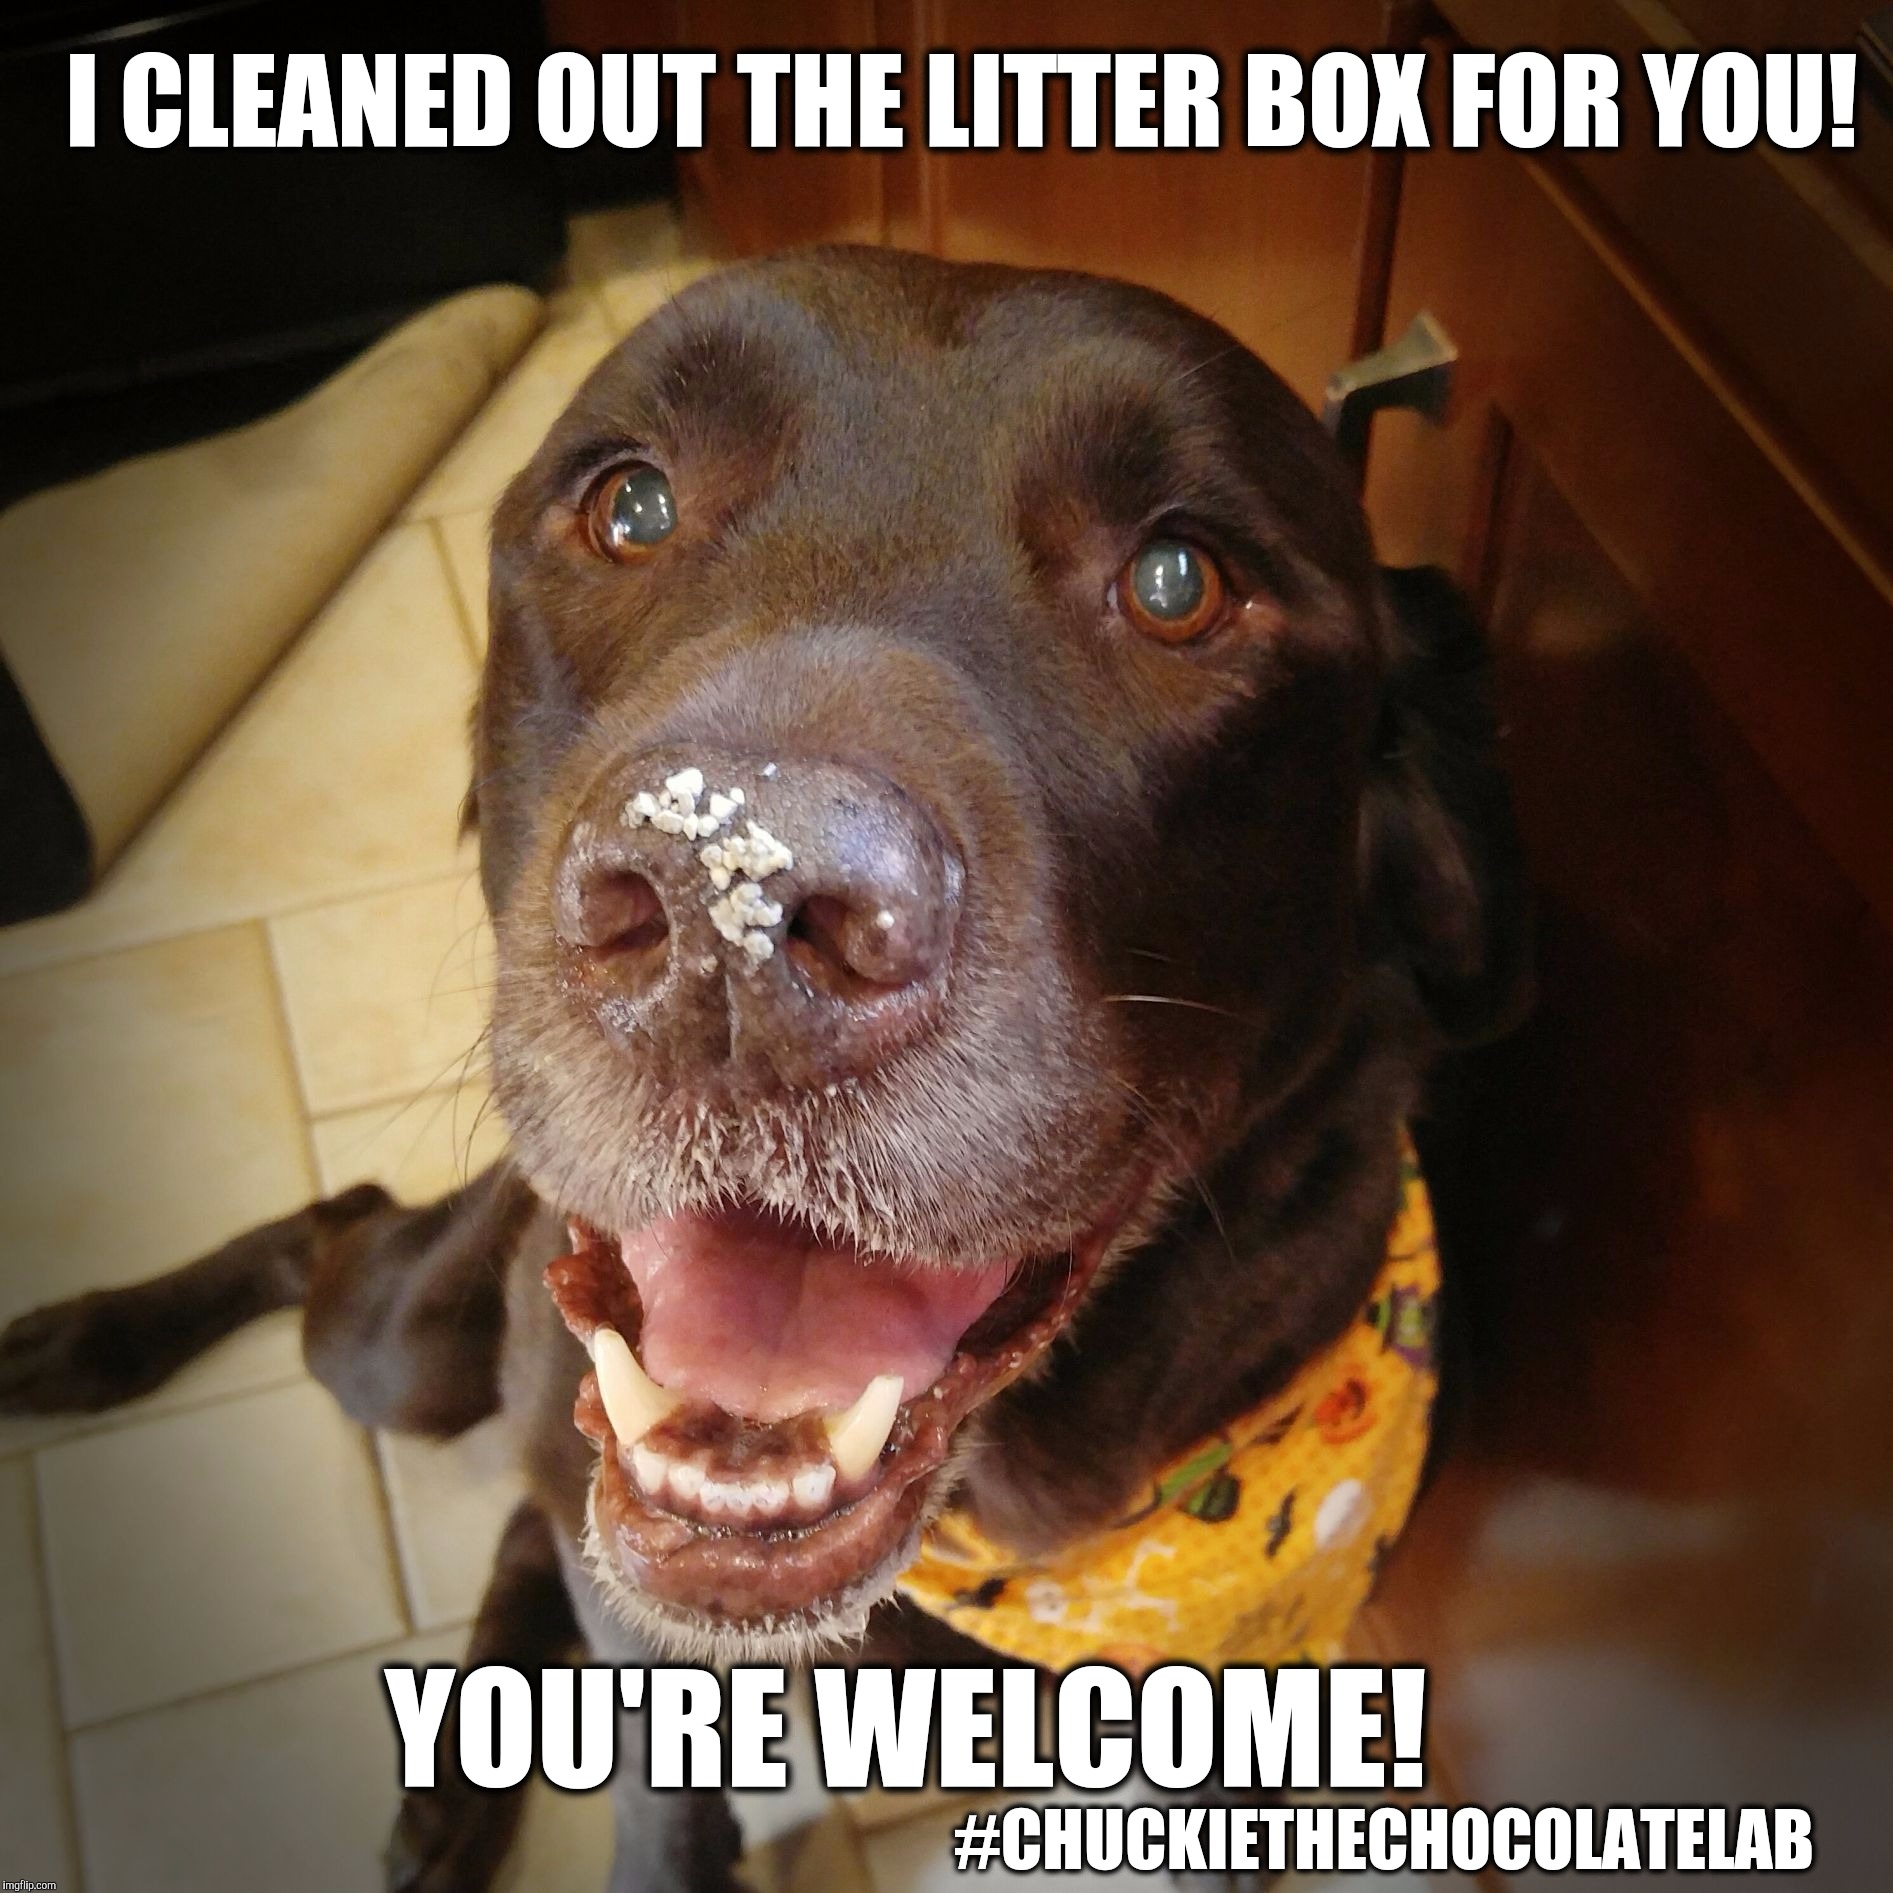 I cleaned out the litter box for you!  | I CLEANED OUT THE LITTER BOX FOR YOU! YOU'RE WELCOME! #CHUCKIETHECHOCOLATELAB | image tagged in chuckie the chocolate lab,you're welcome,litter box,funny,dog,memes | made w/ Imgflip meme maker